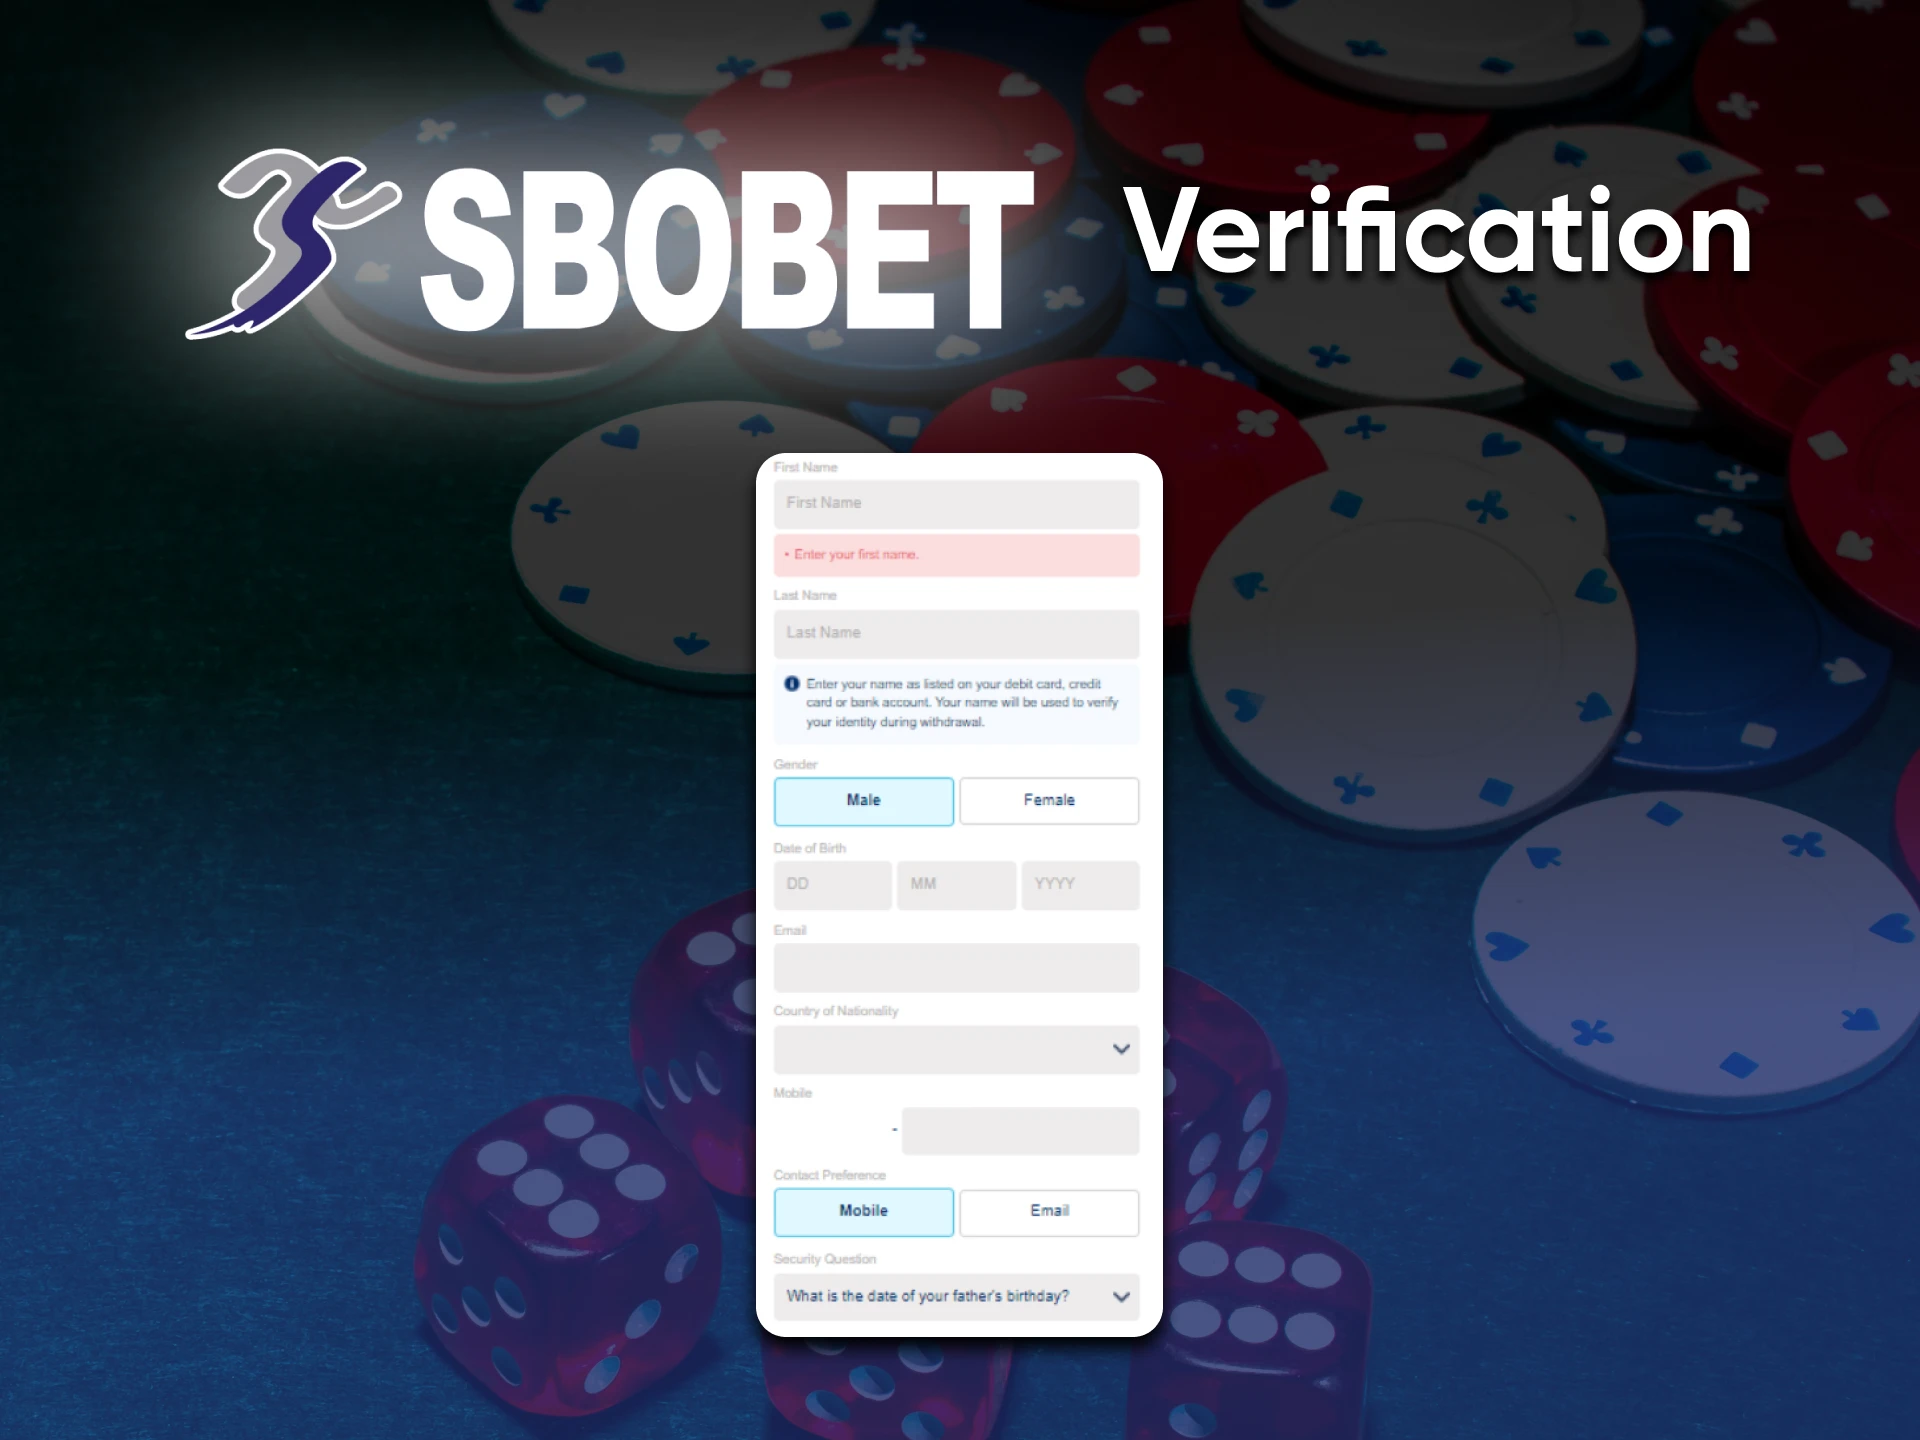 Fill in the data for a full-fledged game in the casino from Sbobet.